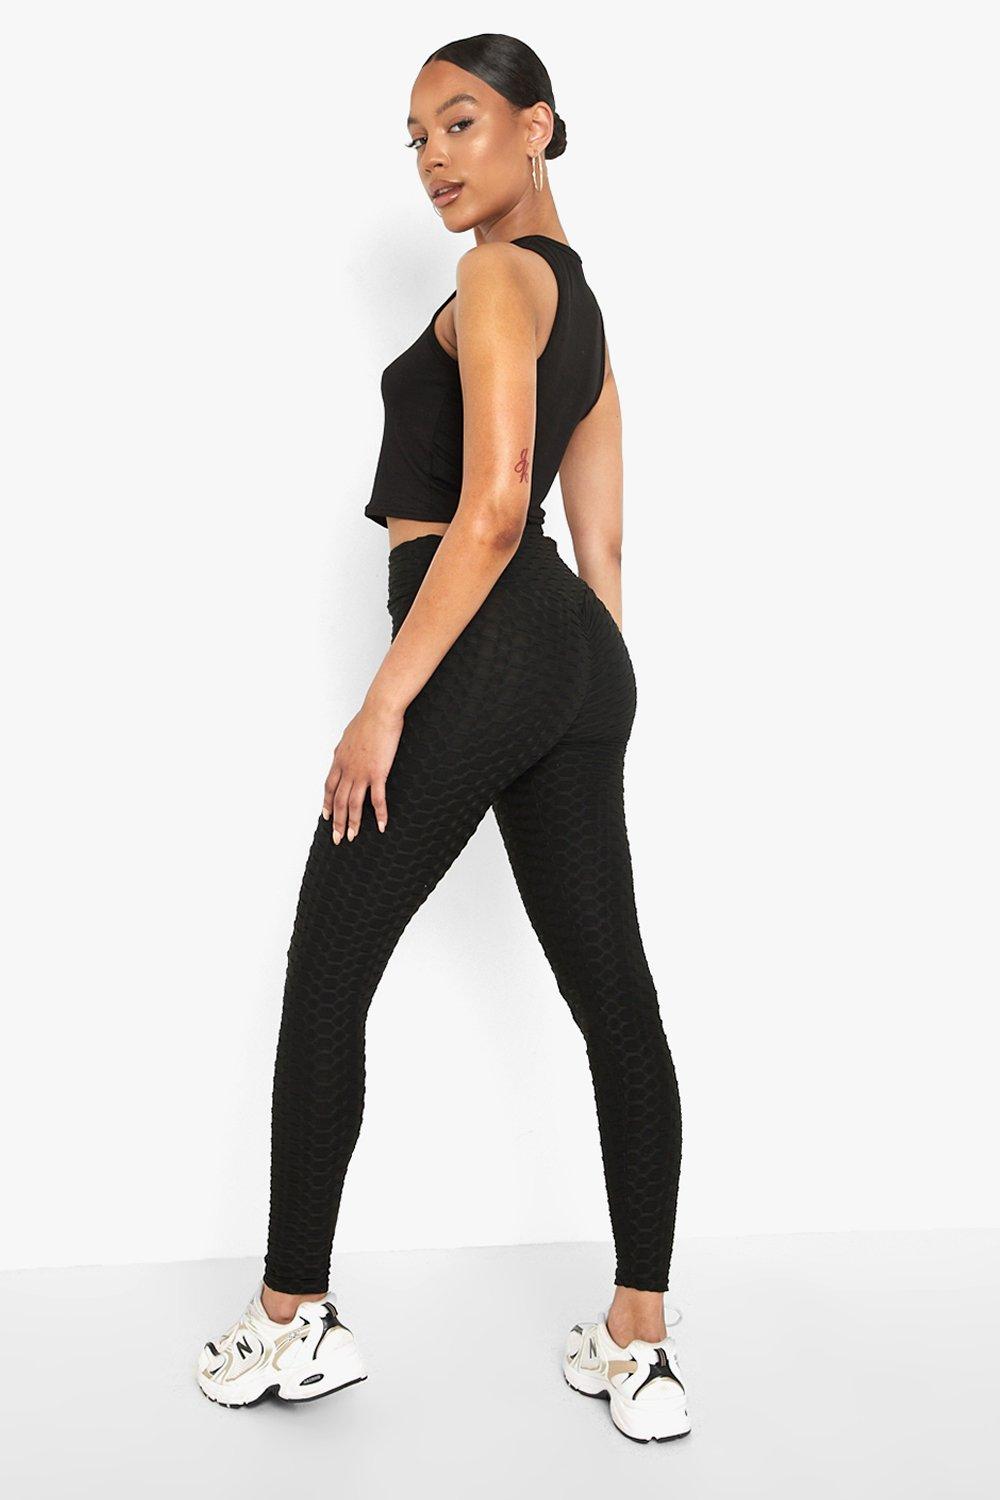 Women's Textured Fitted Leggings